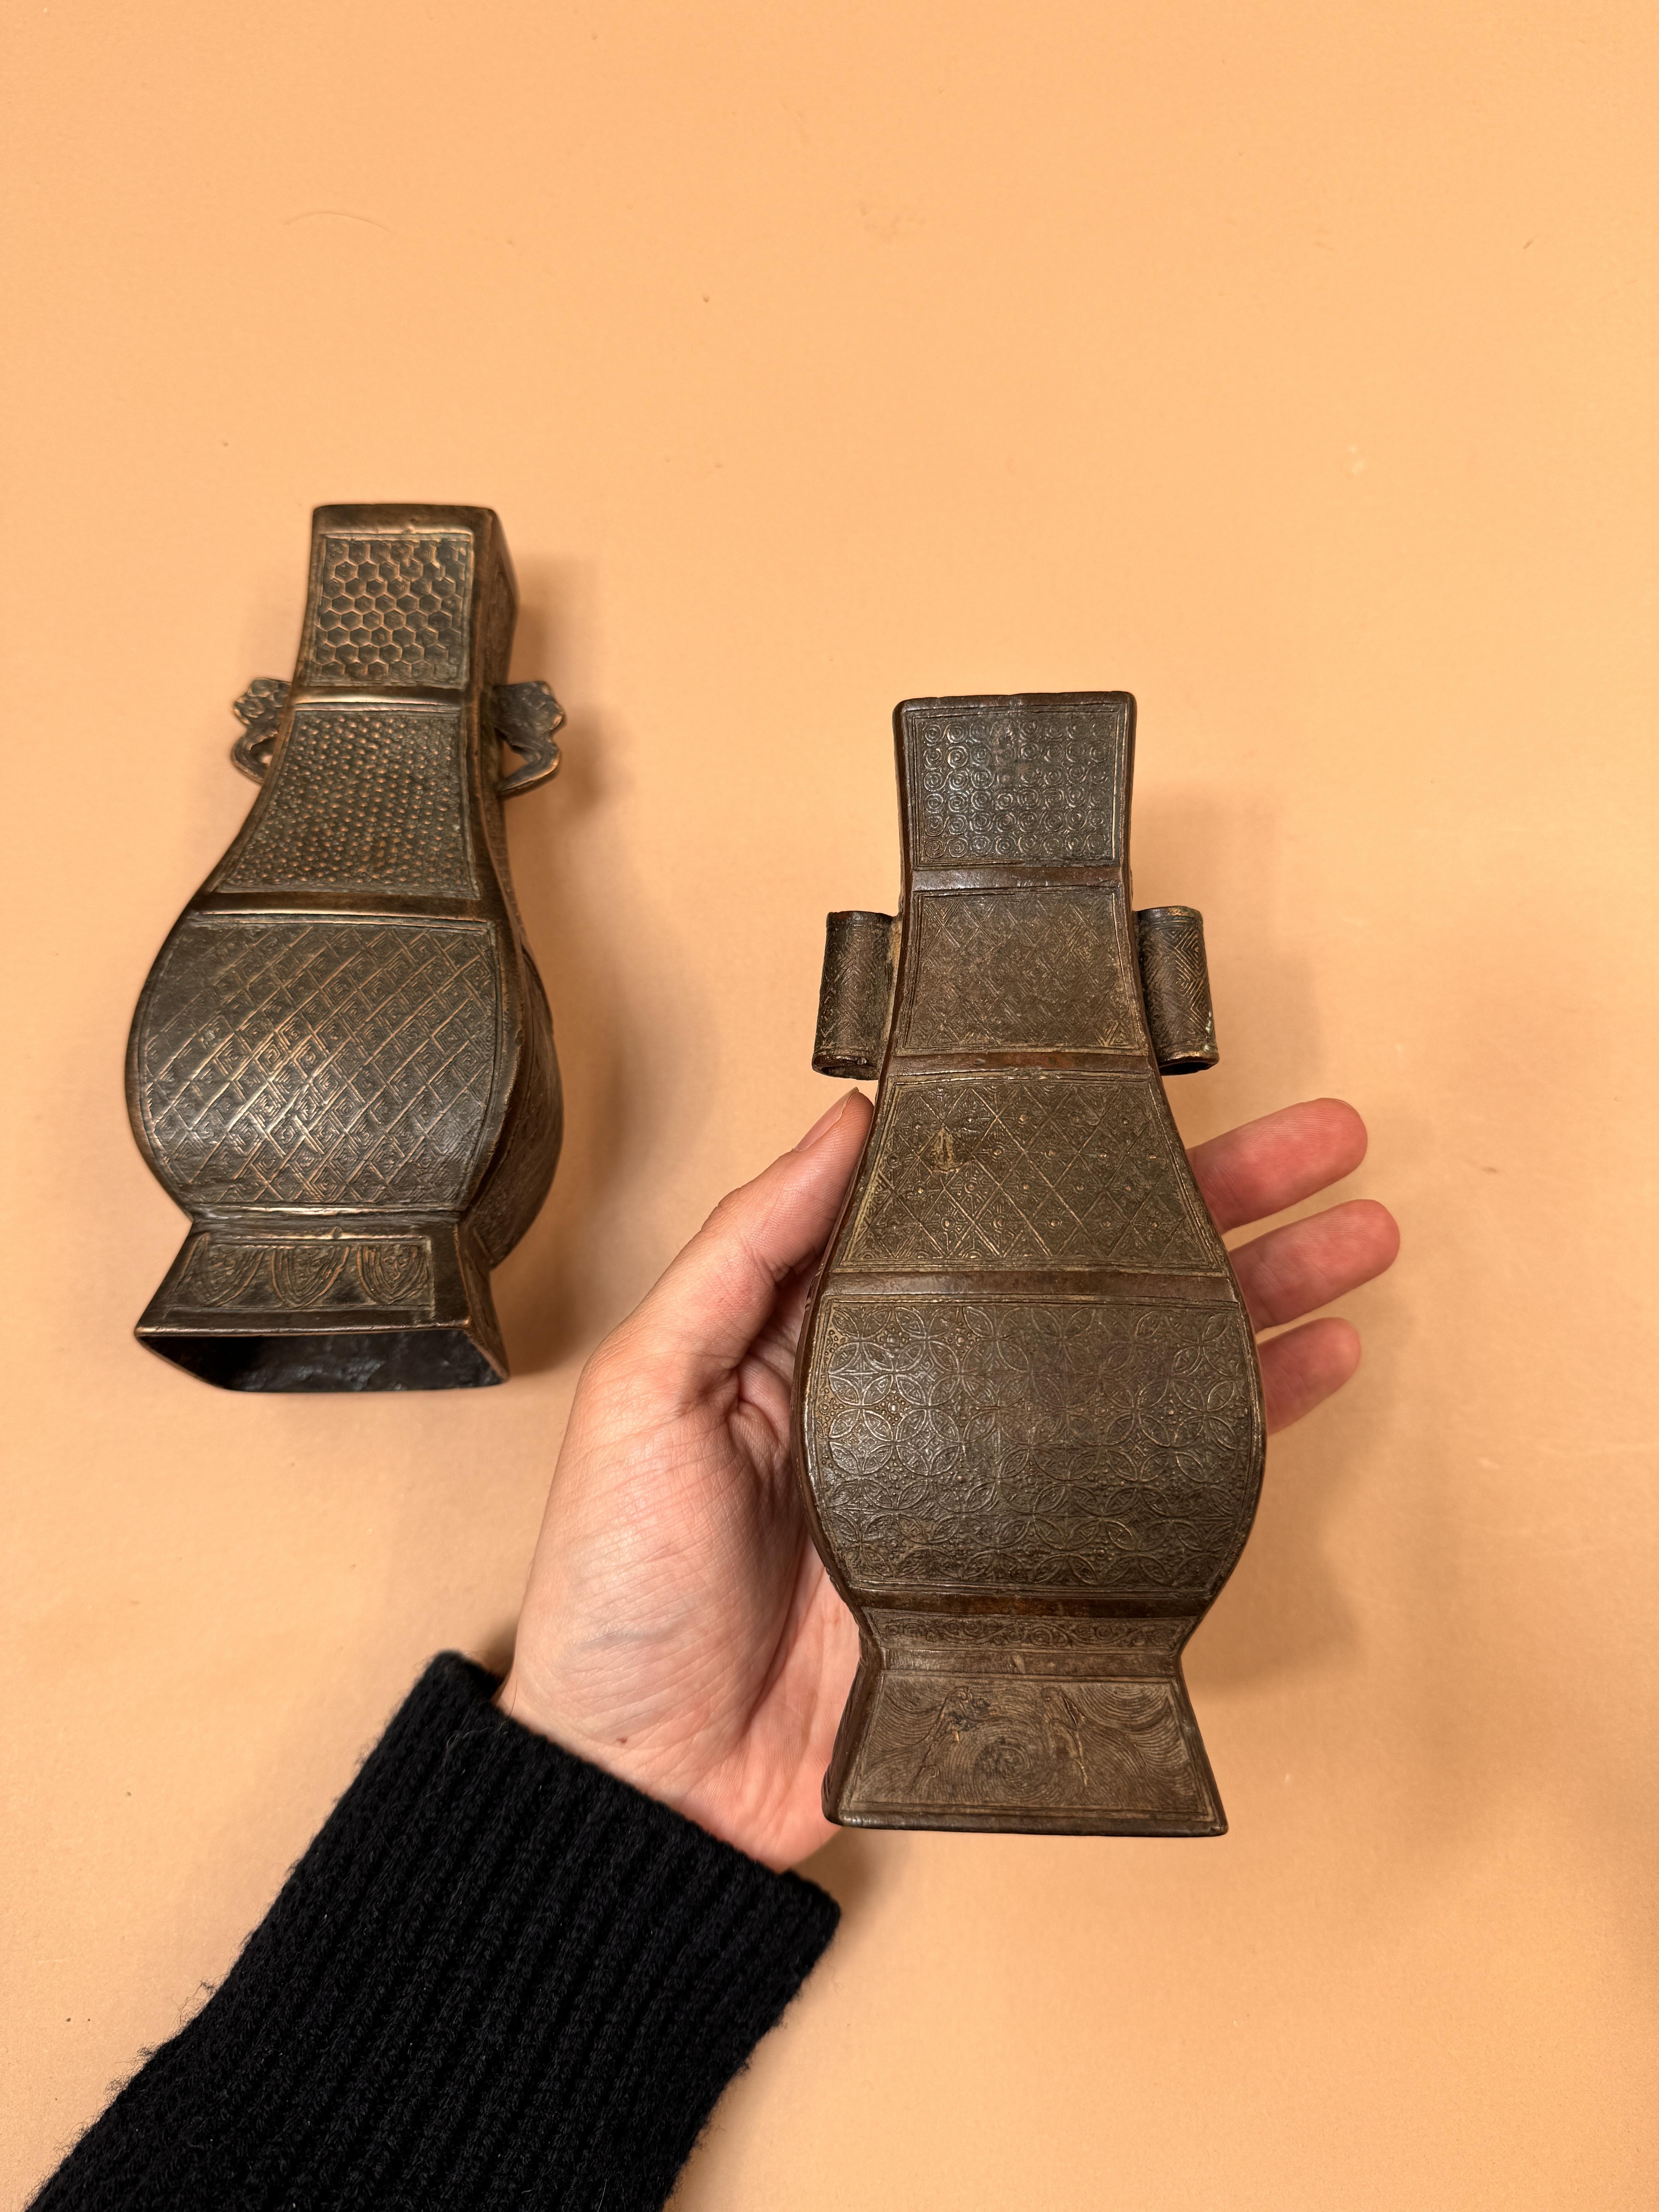 TWO SMALL CHINESE BRONZE ARCHAISTIC VASES 明 銅仿古方壺兩件 - Image 20 of 21